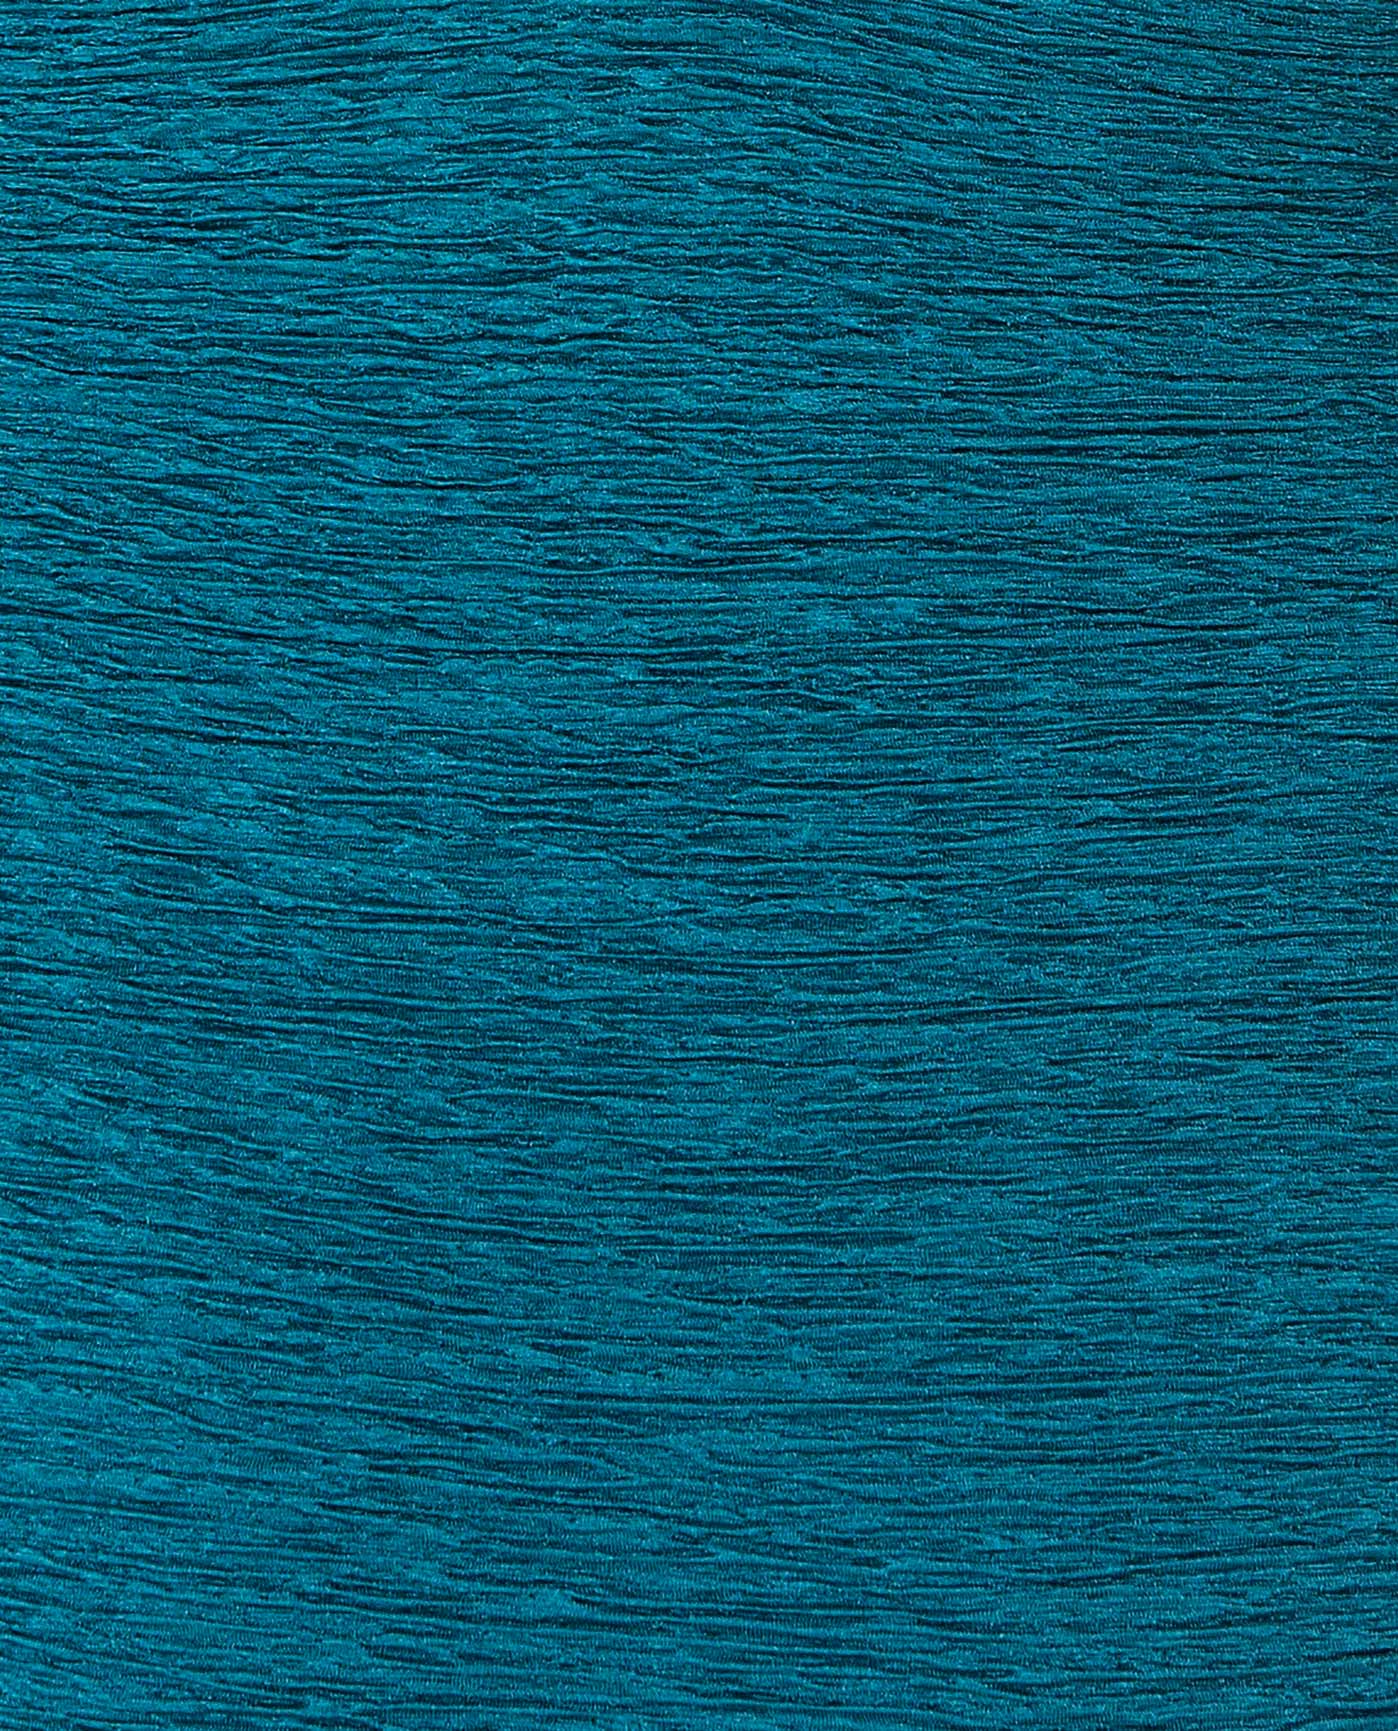 FABRIC SWATCH VIEW OF CHLORINE RESISTANT KRINKLE TEXTURED COLOR BLOCK SPORT V-NECK ONE PIECE | KRINKLE COSMO BLUE